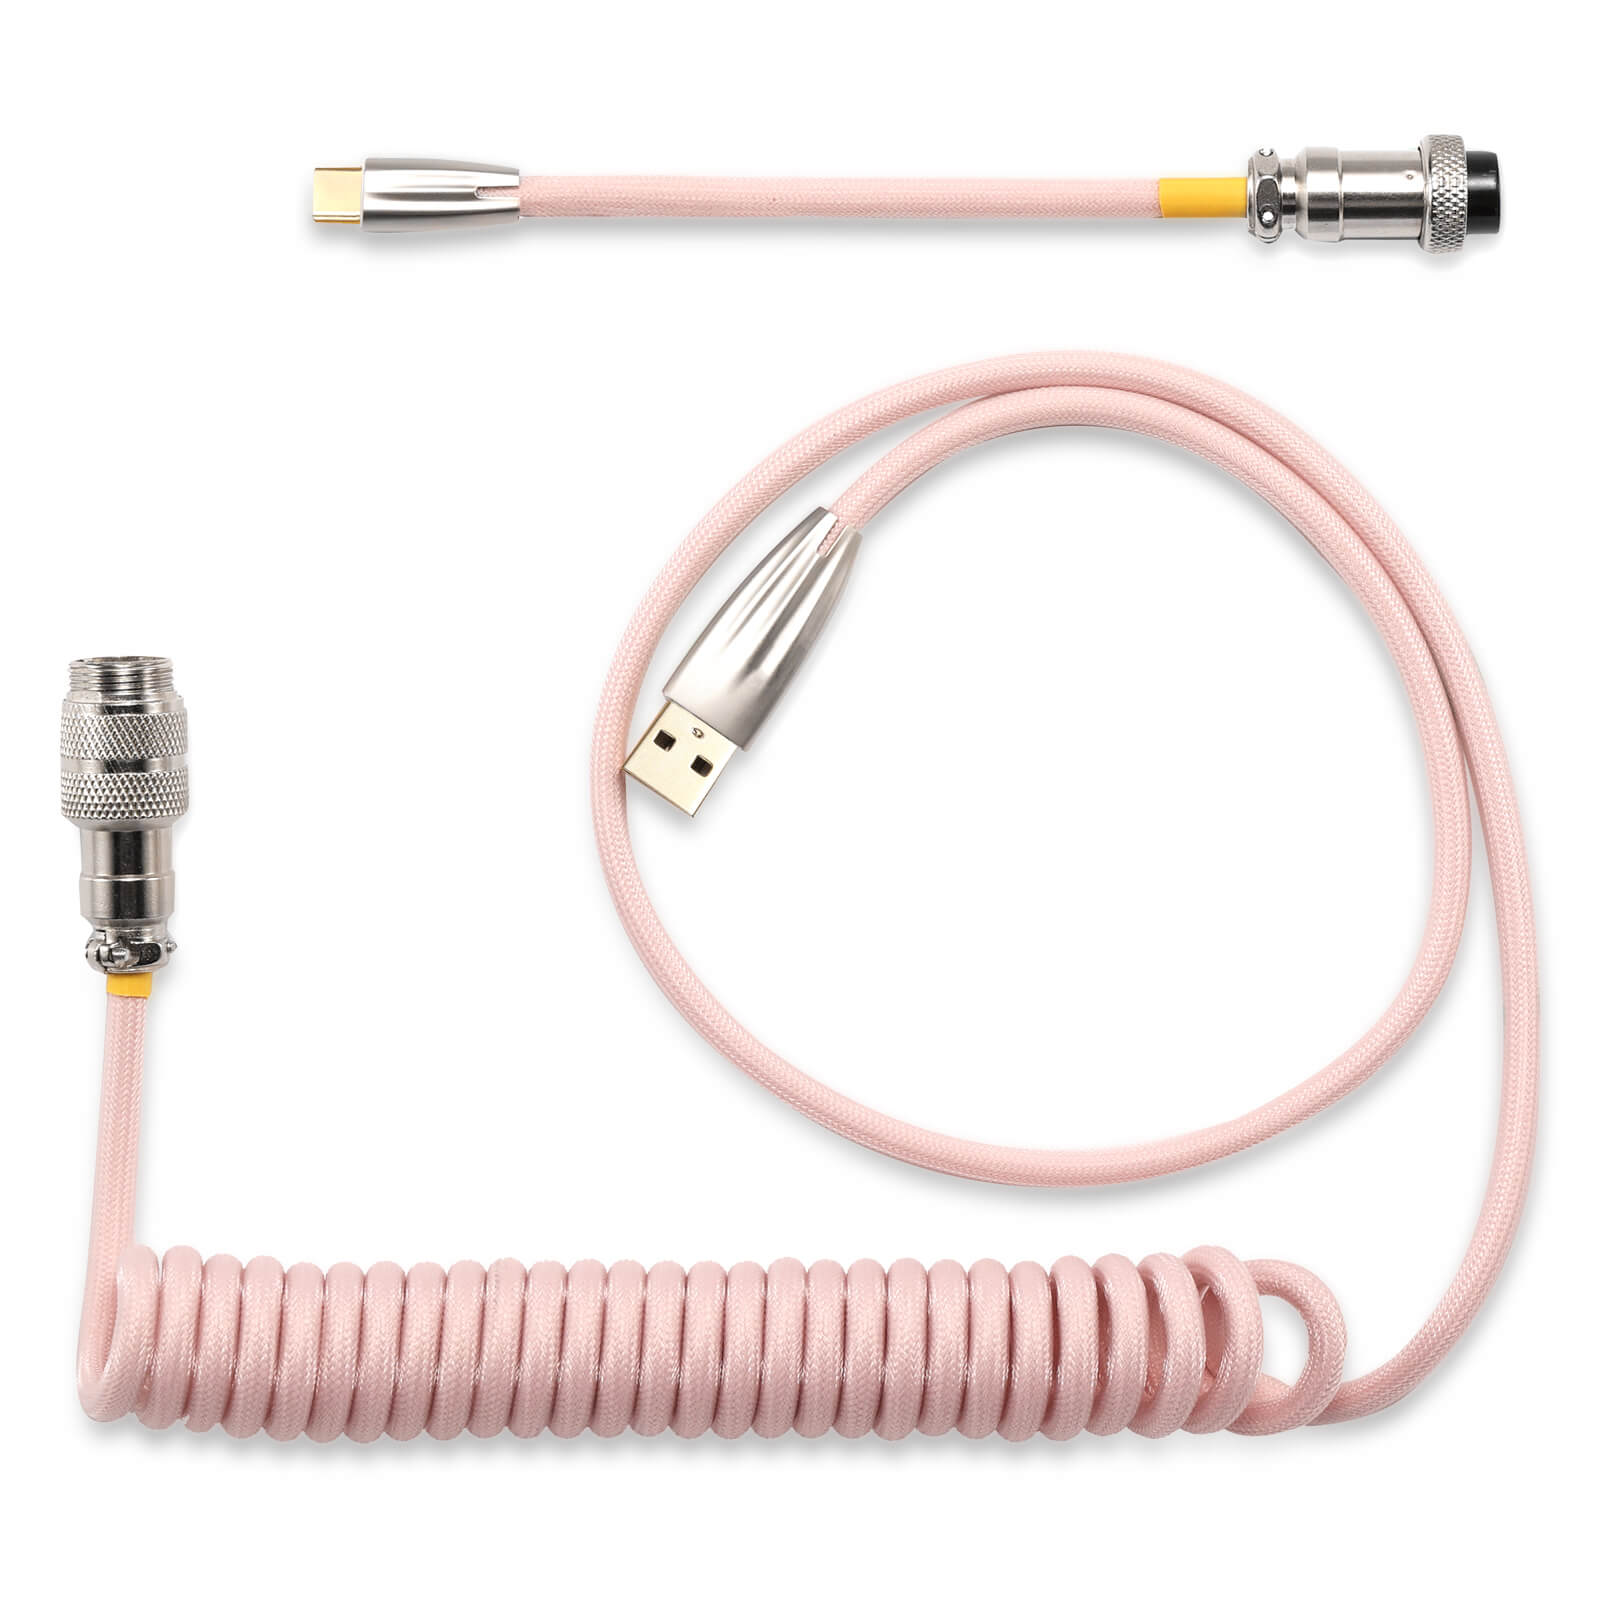 LTC Custom Mechanical Keyboard Coiled Cable USB 3.1 Type C, 1.2m Coiled USB C Cable with Aviator Connector, Pink